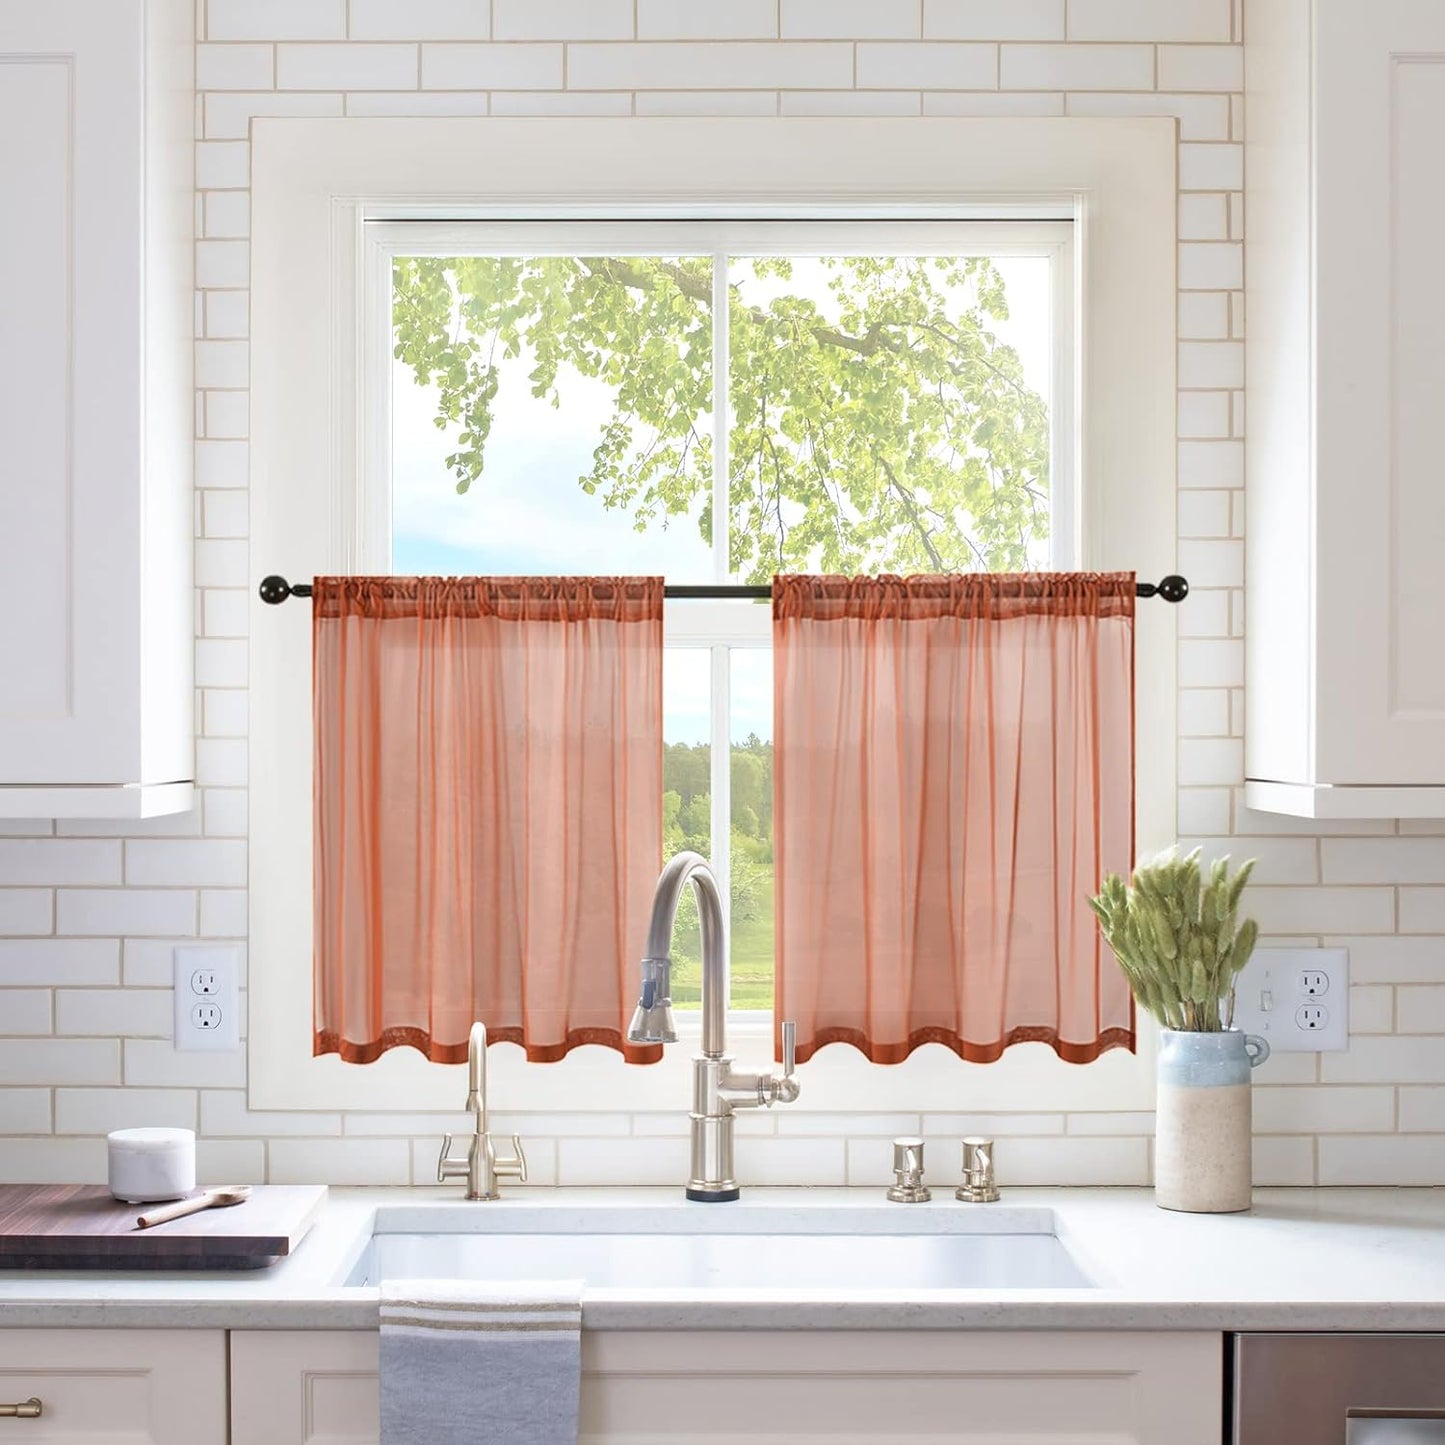 MIULEE White Sheer Curtains 96 Inches Long Window Curtains 2 Panels Solid Color Elegant Window Voile Panels/Drapes/Treatment for Bedroom Living Room (54 X 96 Inches White)  MIULEE Burnt Orange 29''W X 24''L 